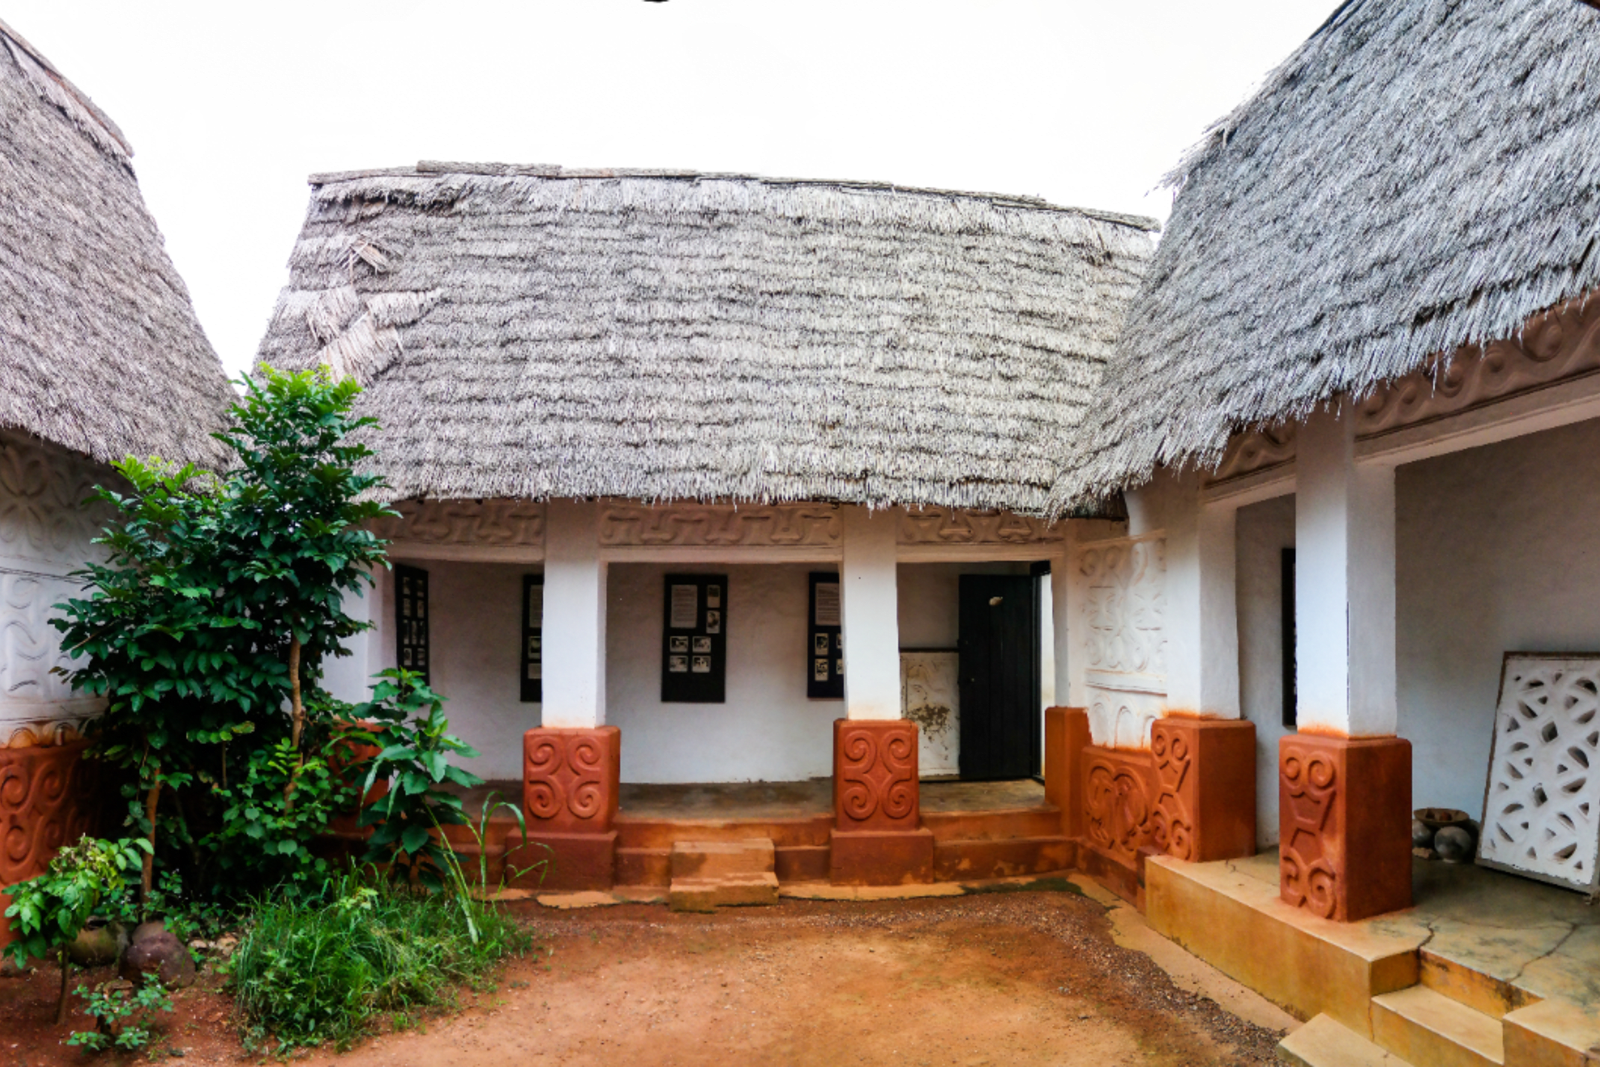 Traditional shrine houses of the Ashanti people in Ghana